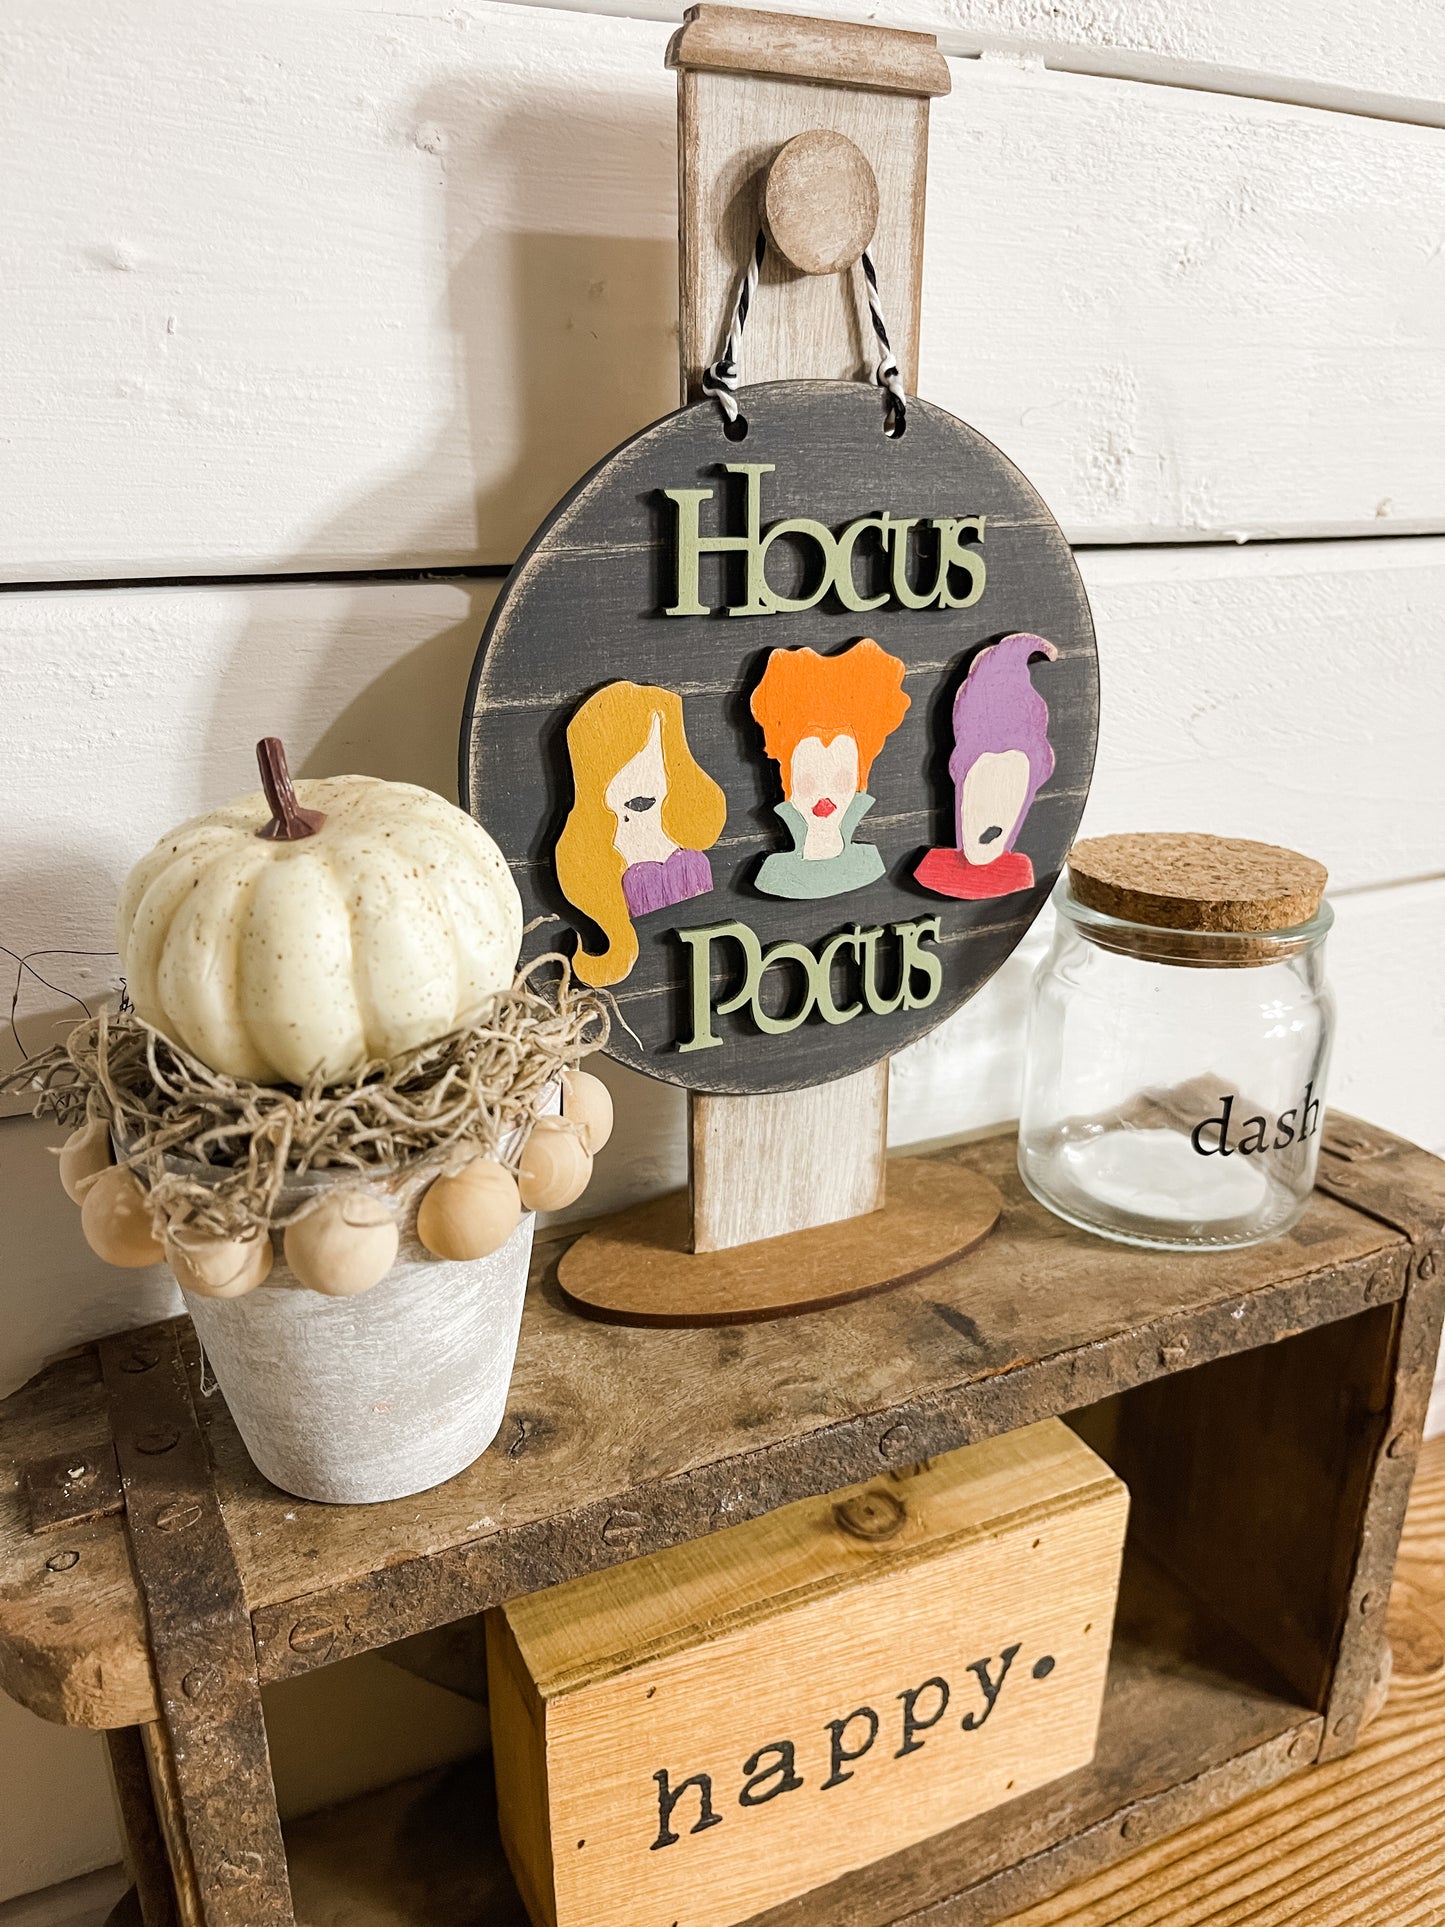 Hocus Pocus 5 in round Sign with Stand DIY Kit